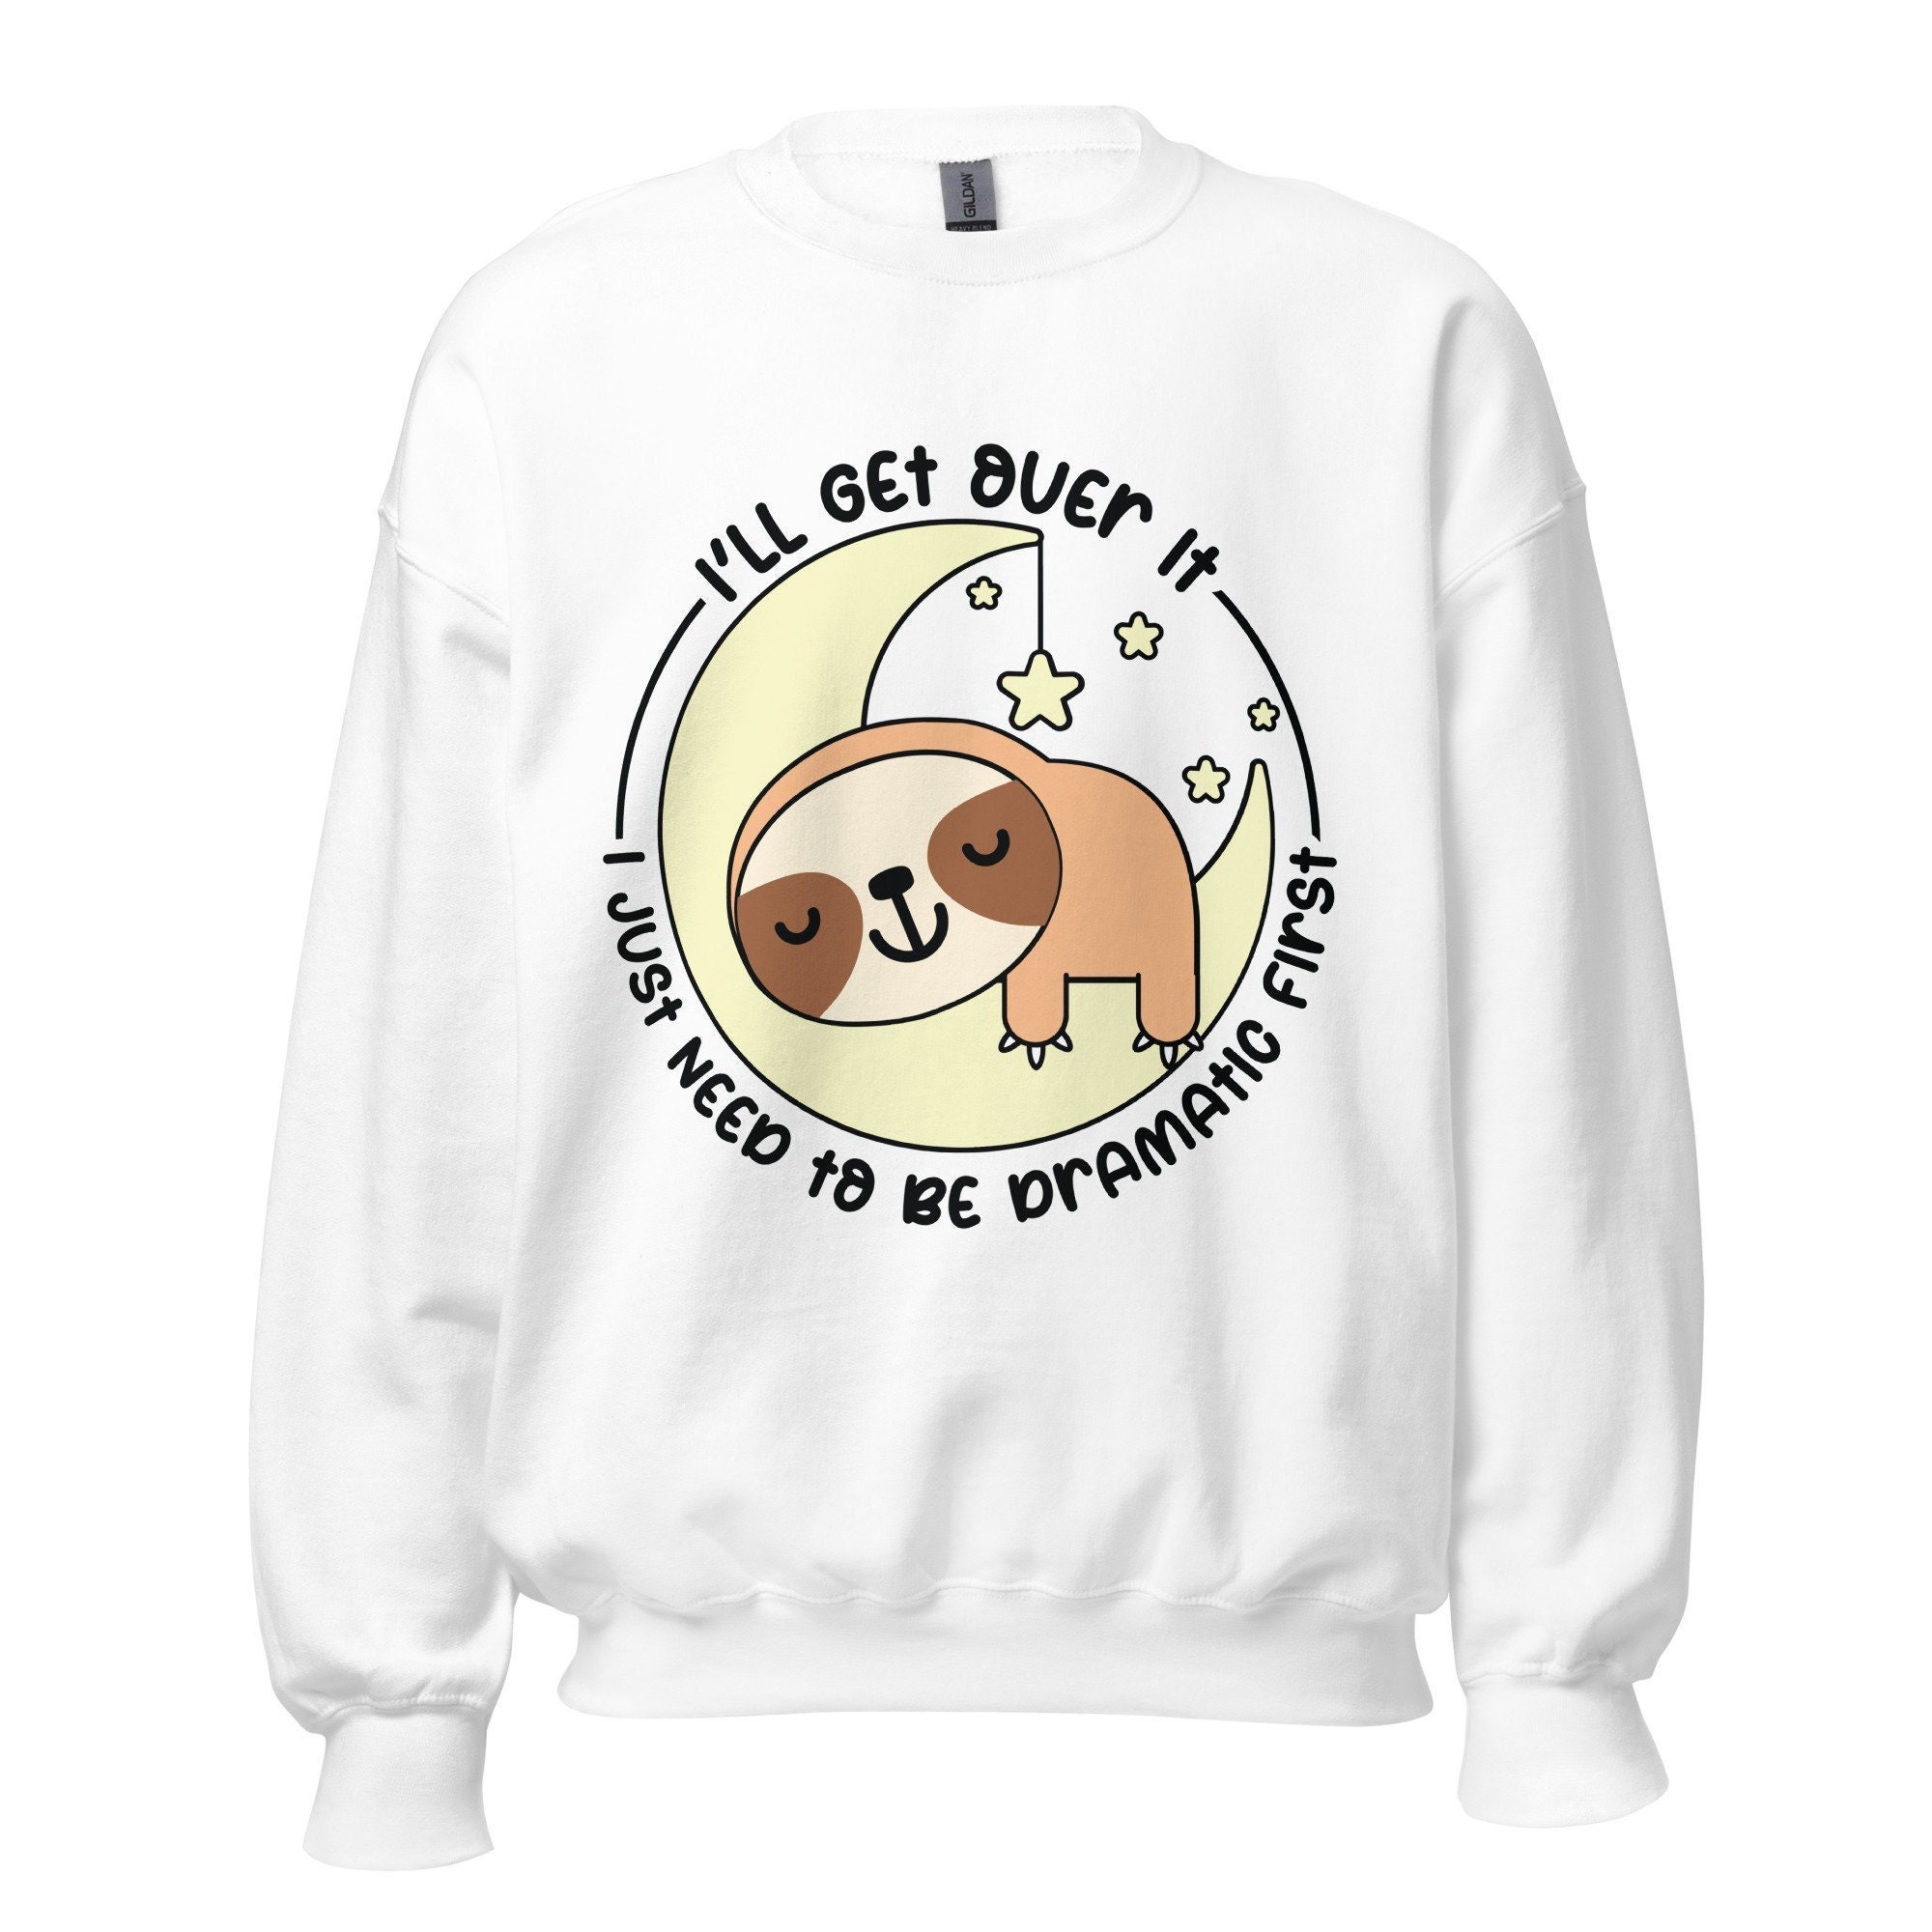 Discover I'll Get Over It I just To Be Dramatic First Sweatshirt, Funny Sloth Sweatshirt, Sarcastic Shirt